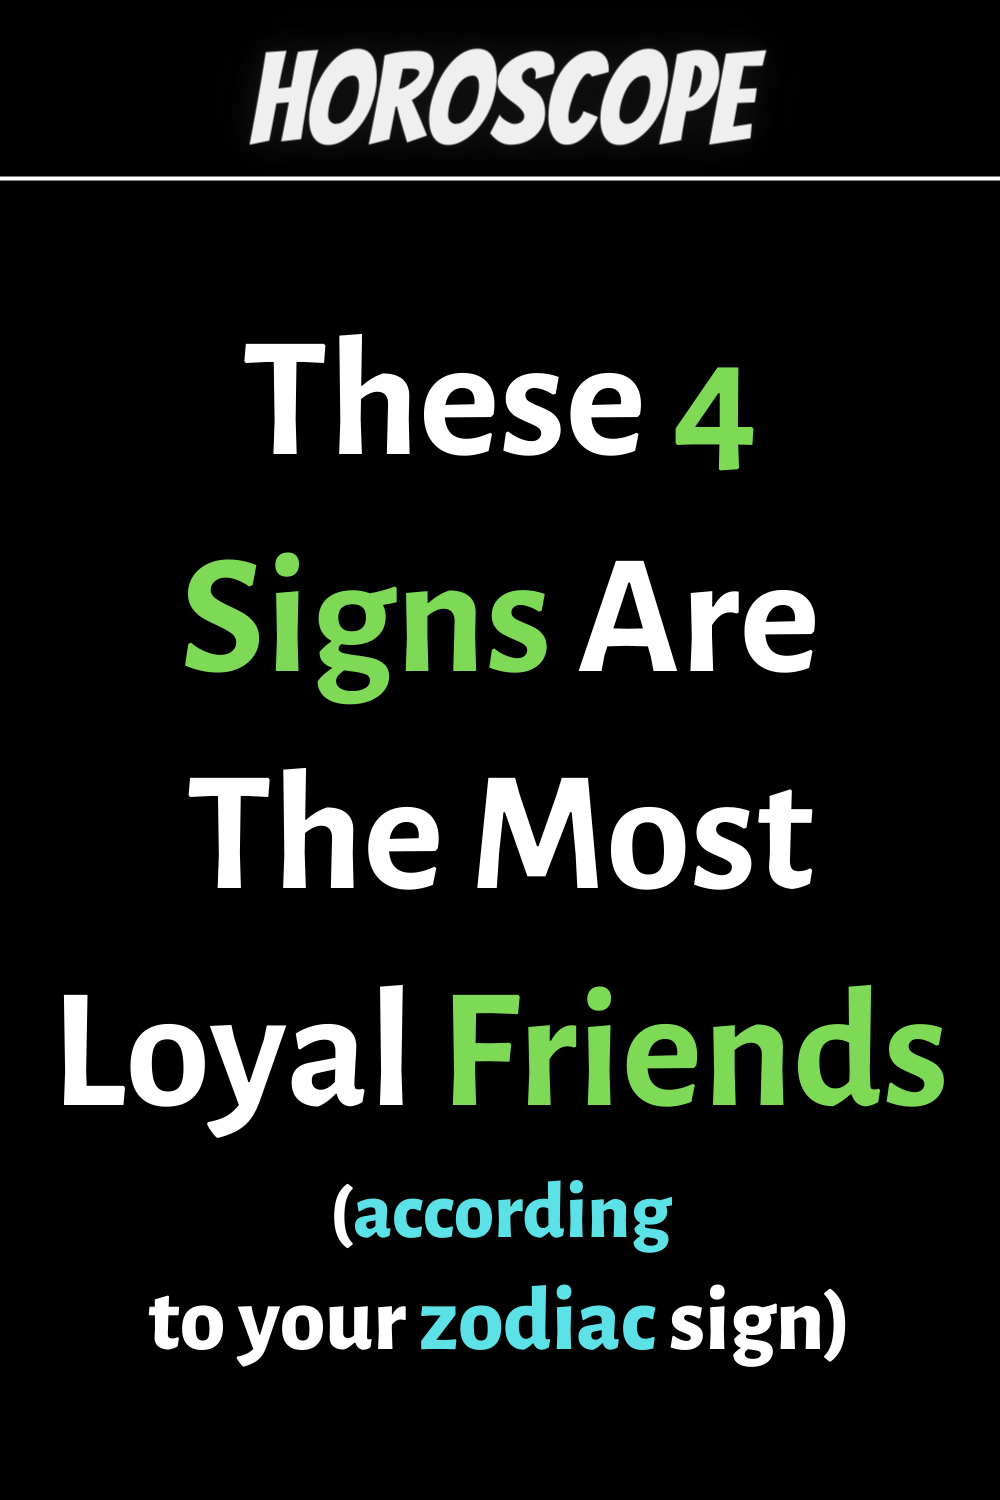 These 4 Zodiac Signs Are The Most Loyal Friends